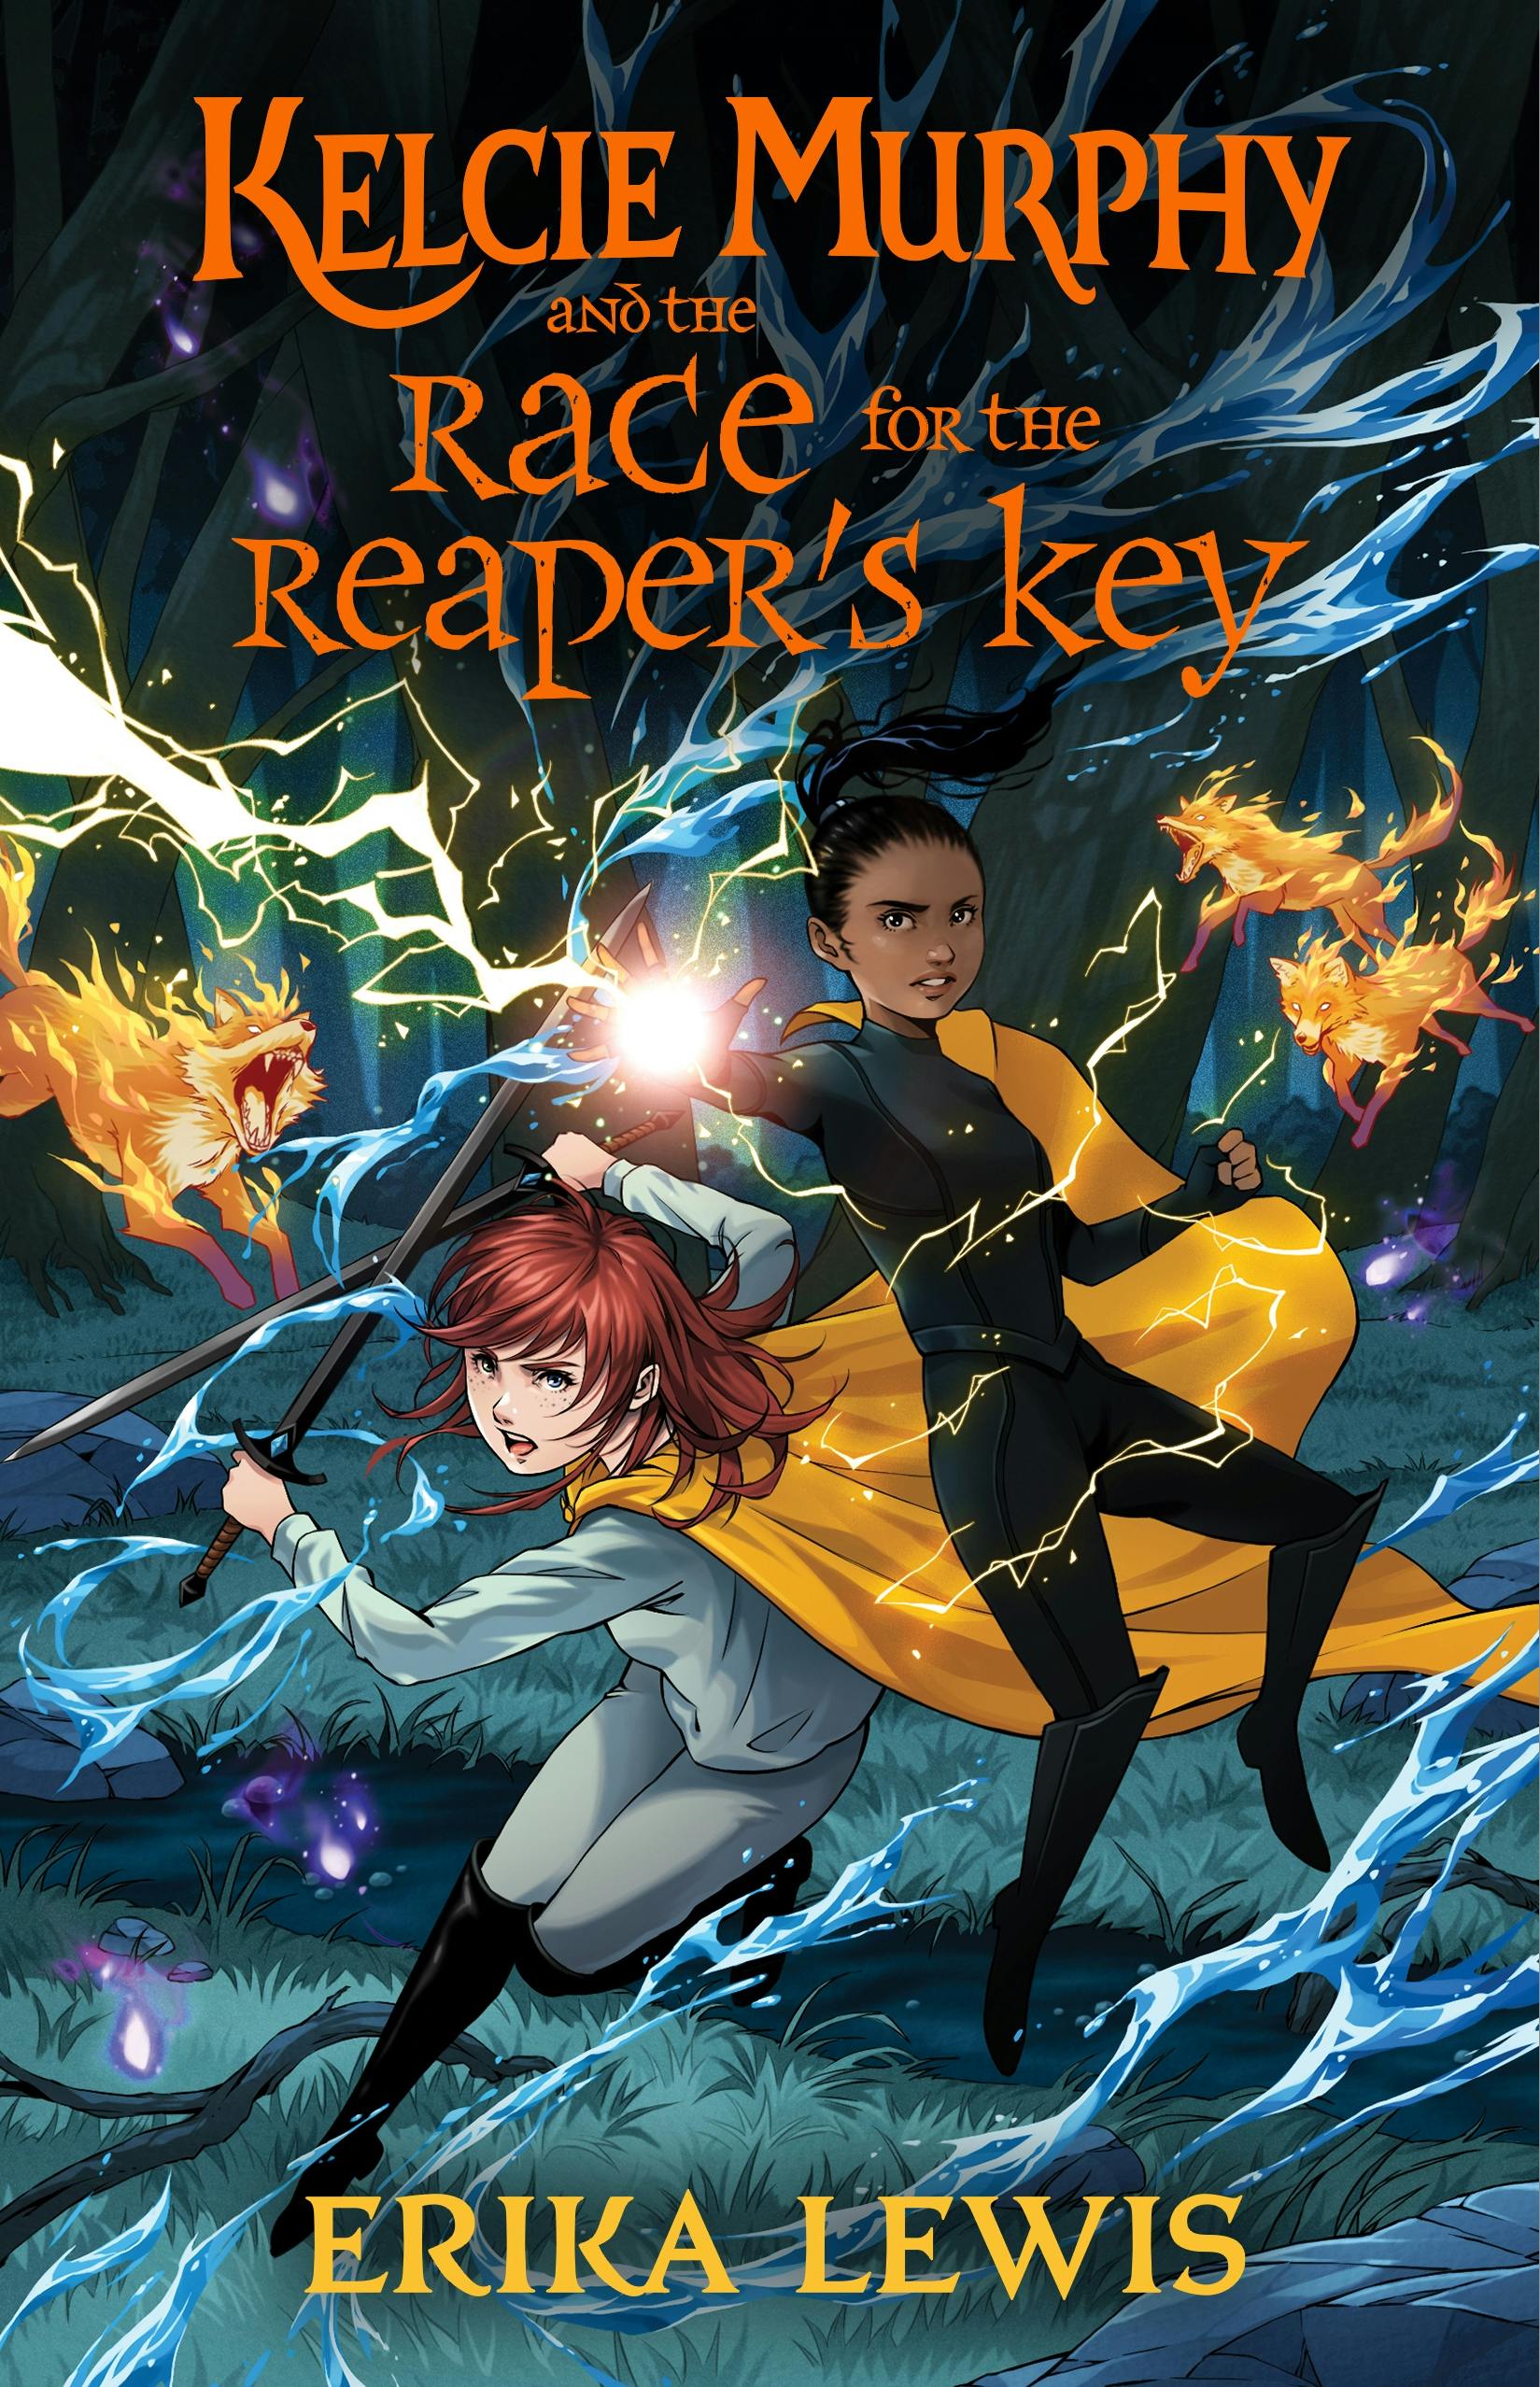 Cover for the book titled as: Kelcie Murphy and the Race for the Reaper's Key